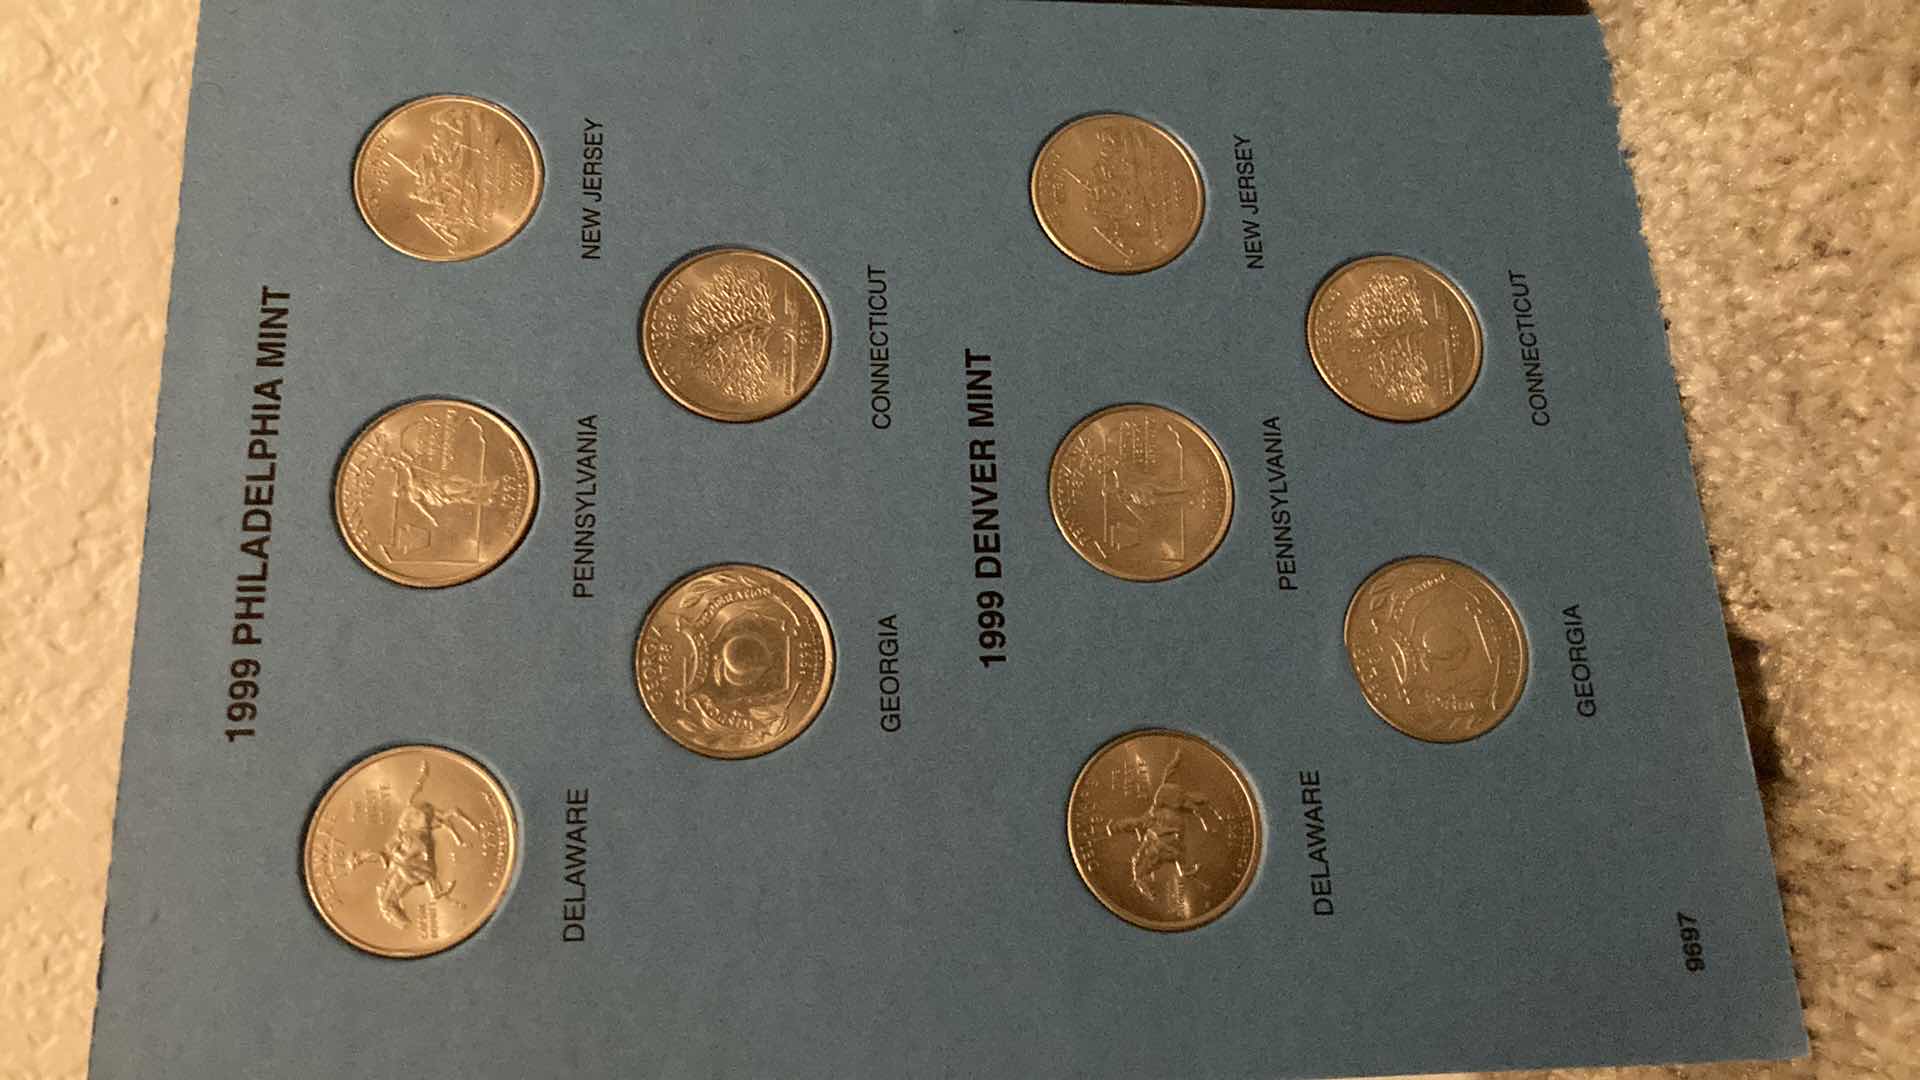 Photo 3 of OFFICIAL WHITMAN COIN FOLDER STATEHOOD QUARTERS COLLECTION 1999-2001 NO. 1 W COMPLETE COLLECTION OF QUARTERS